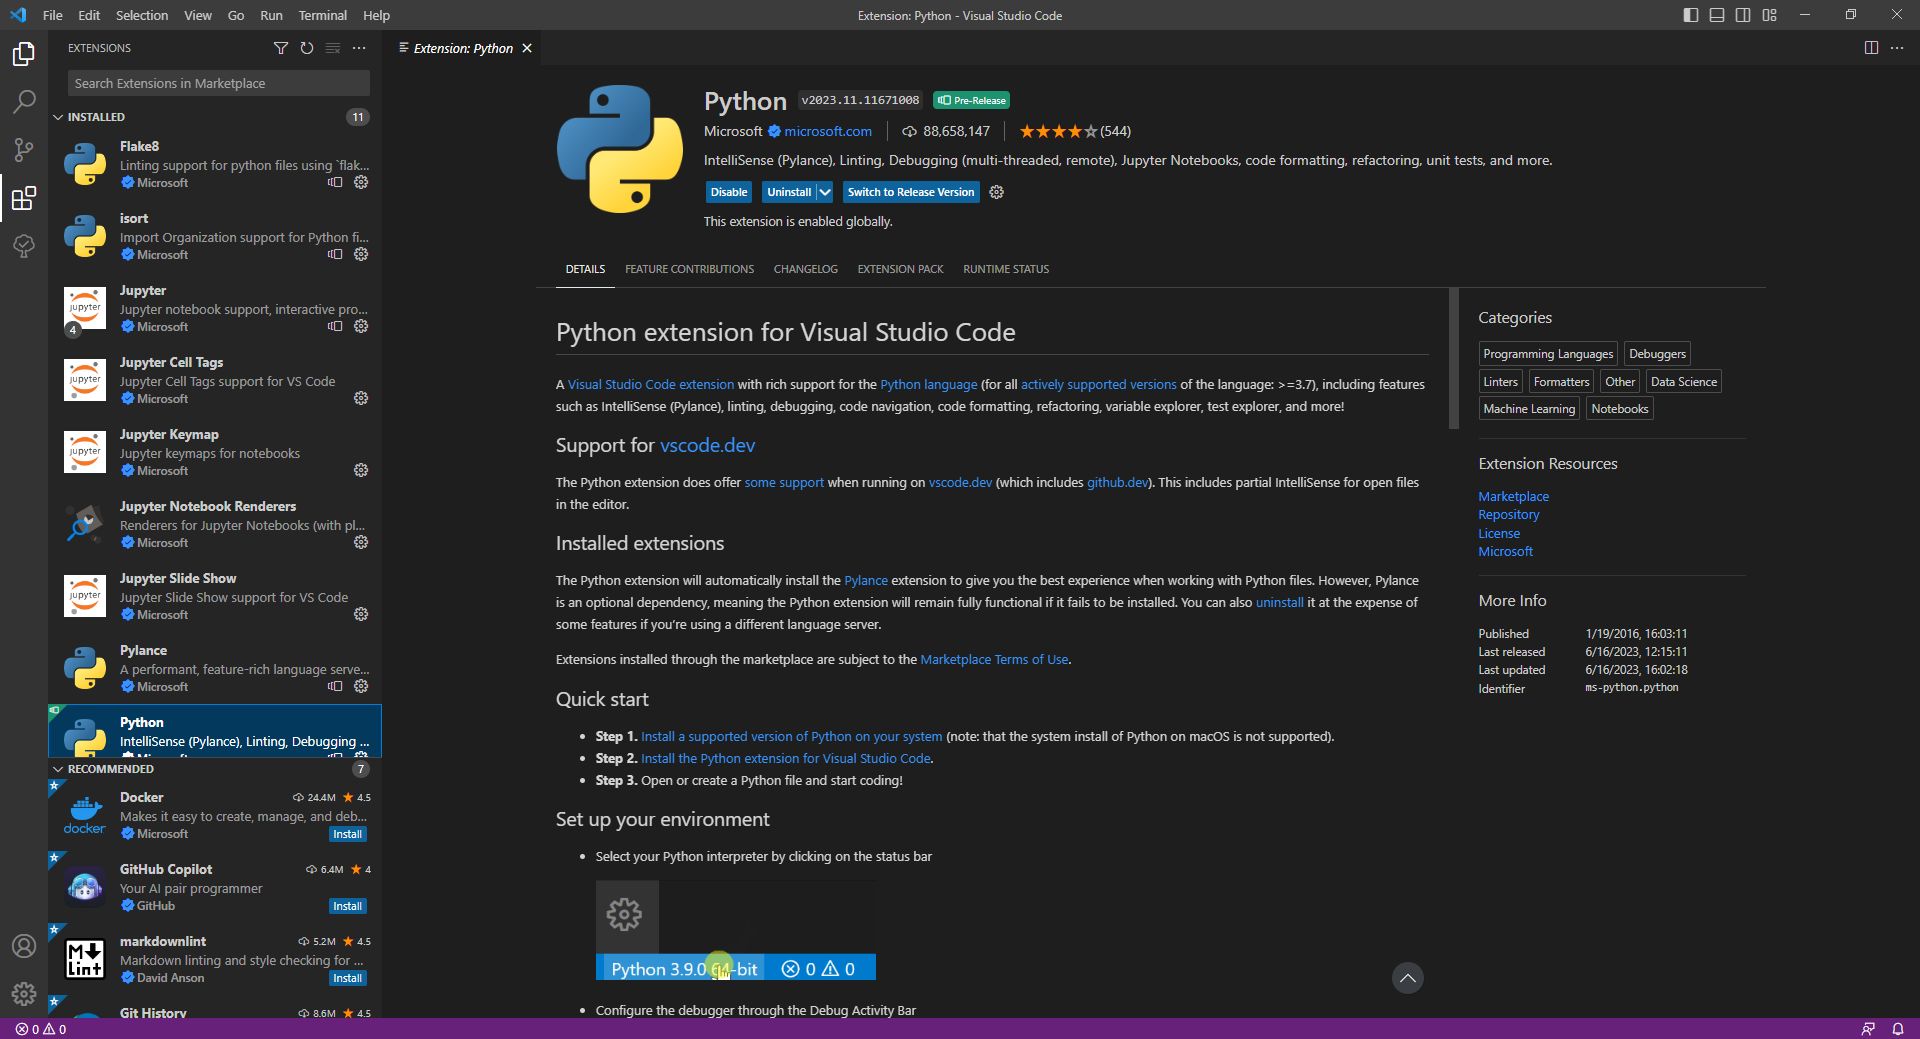 vscode_overview